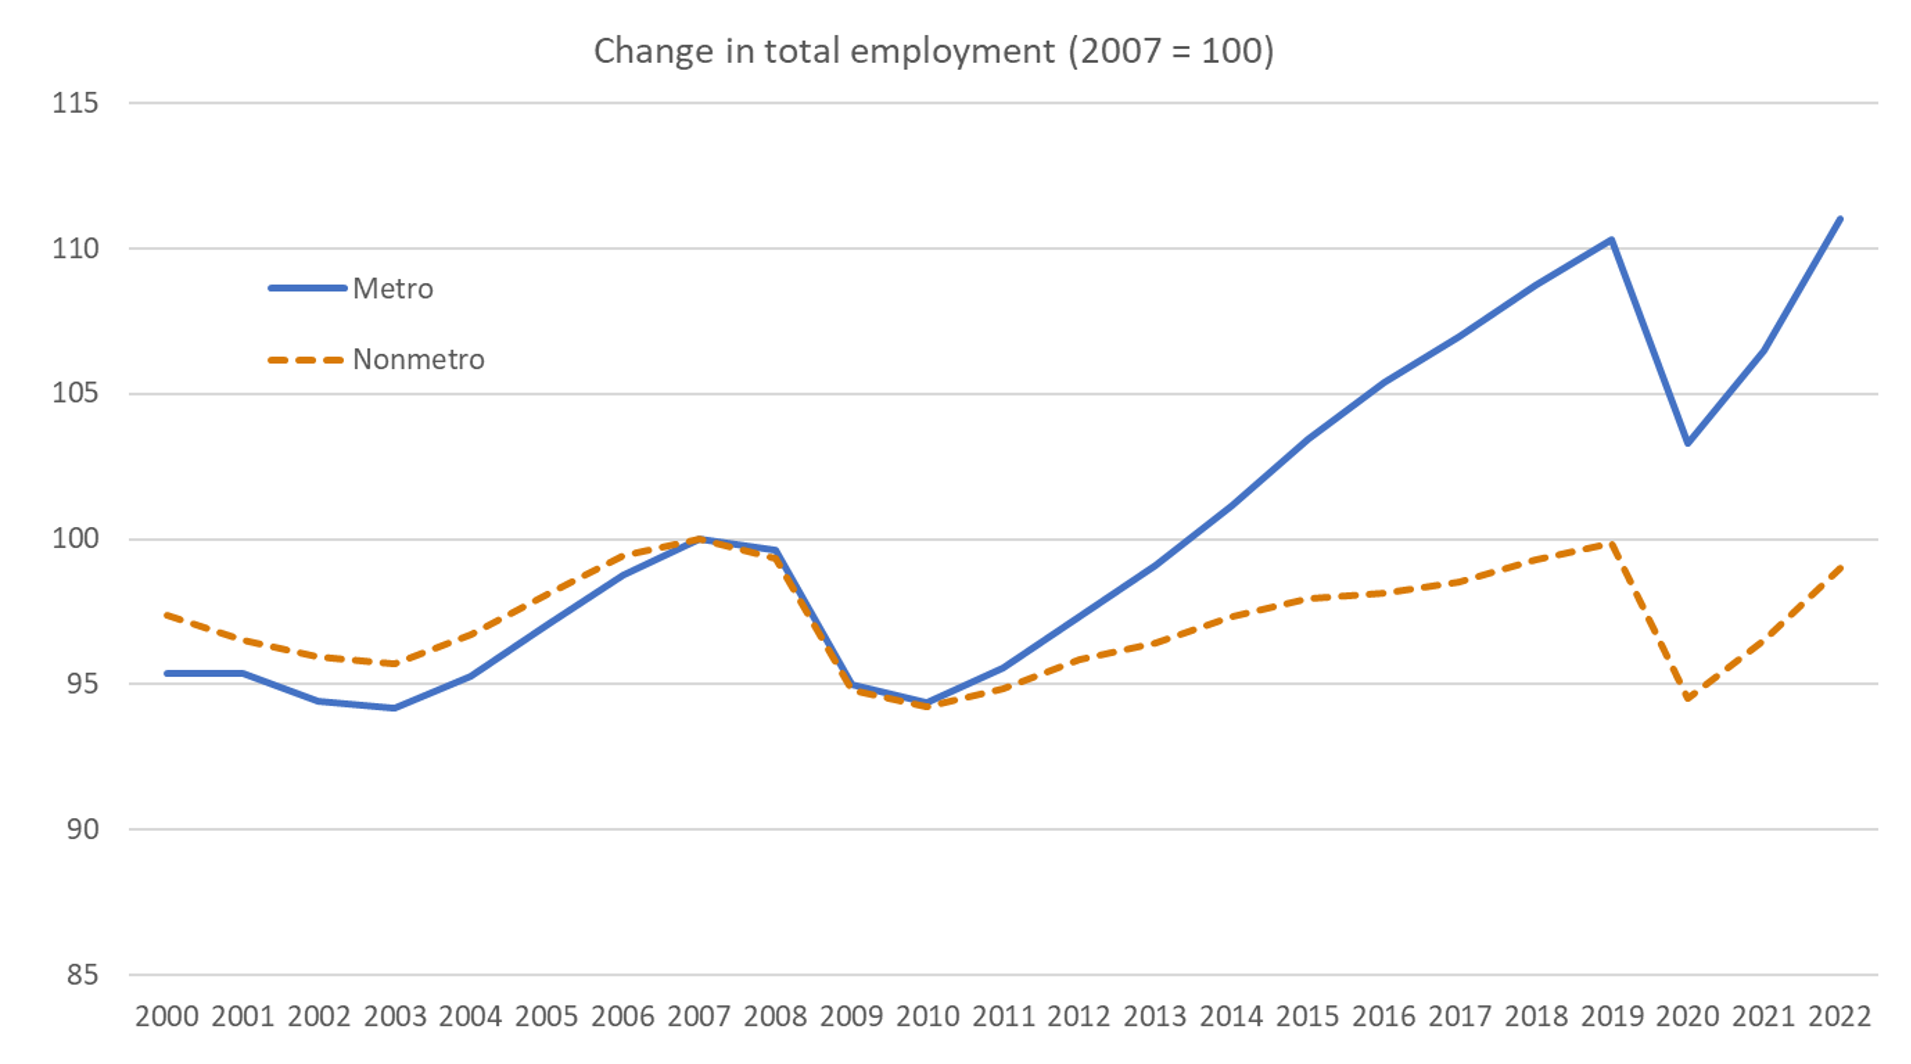 Figure 6. Overall employment change by metro status, 2000-2022. See accessible link for data.